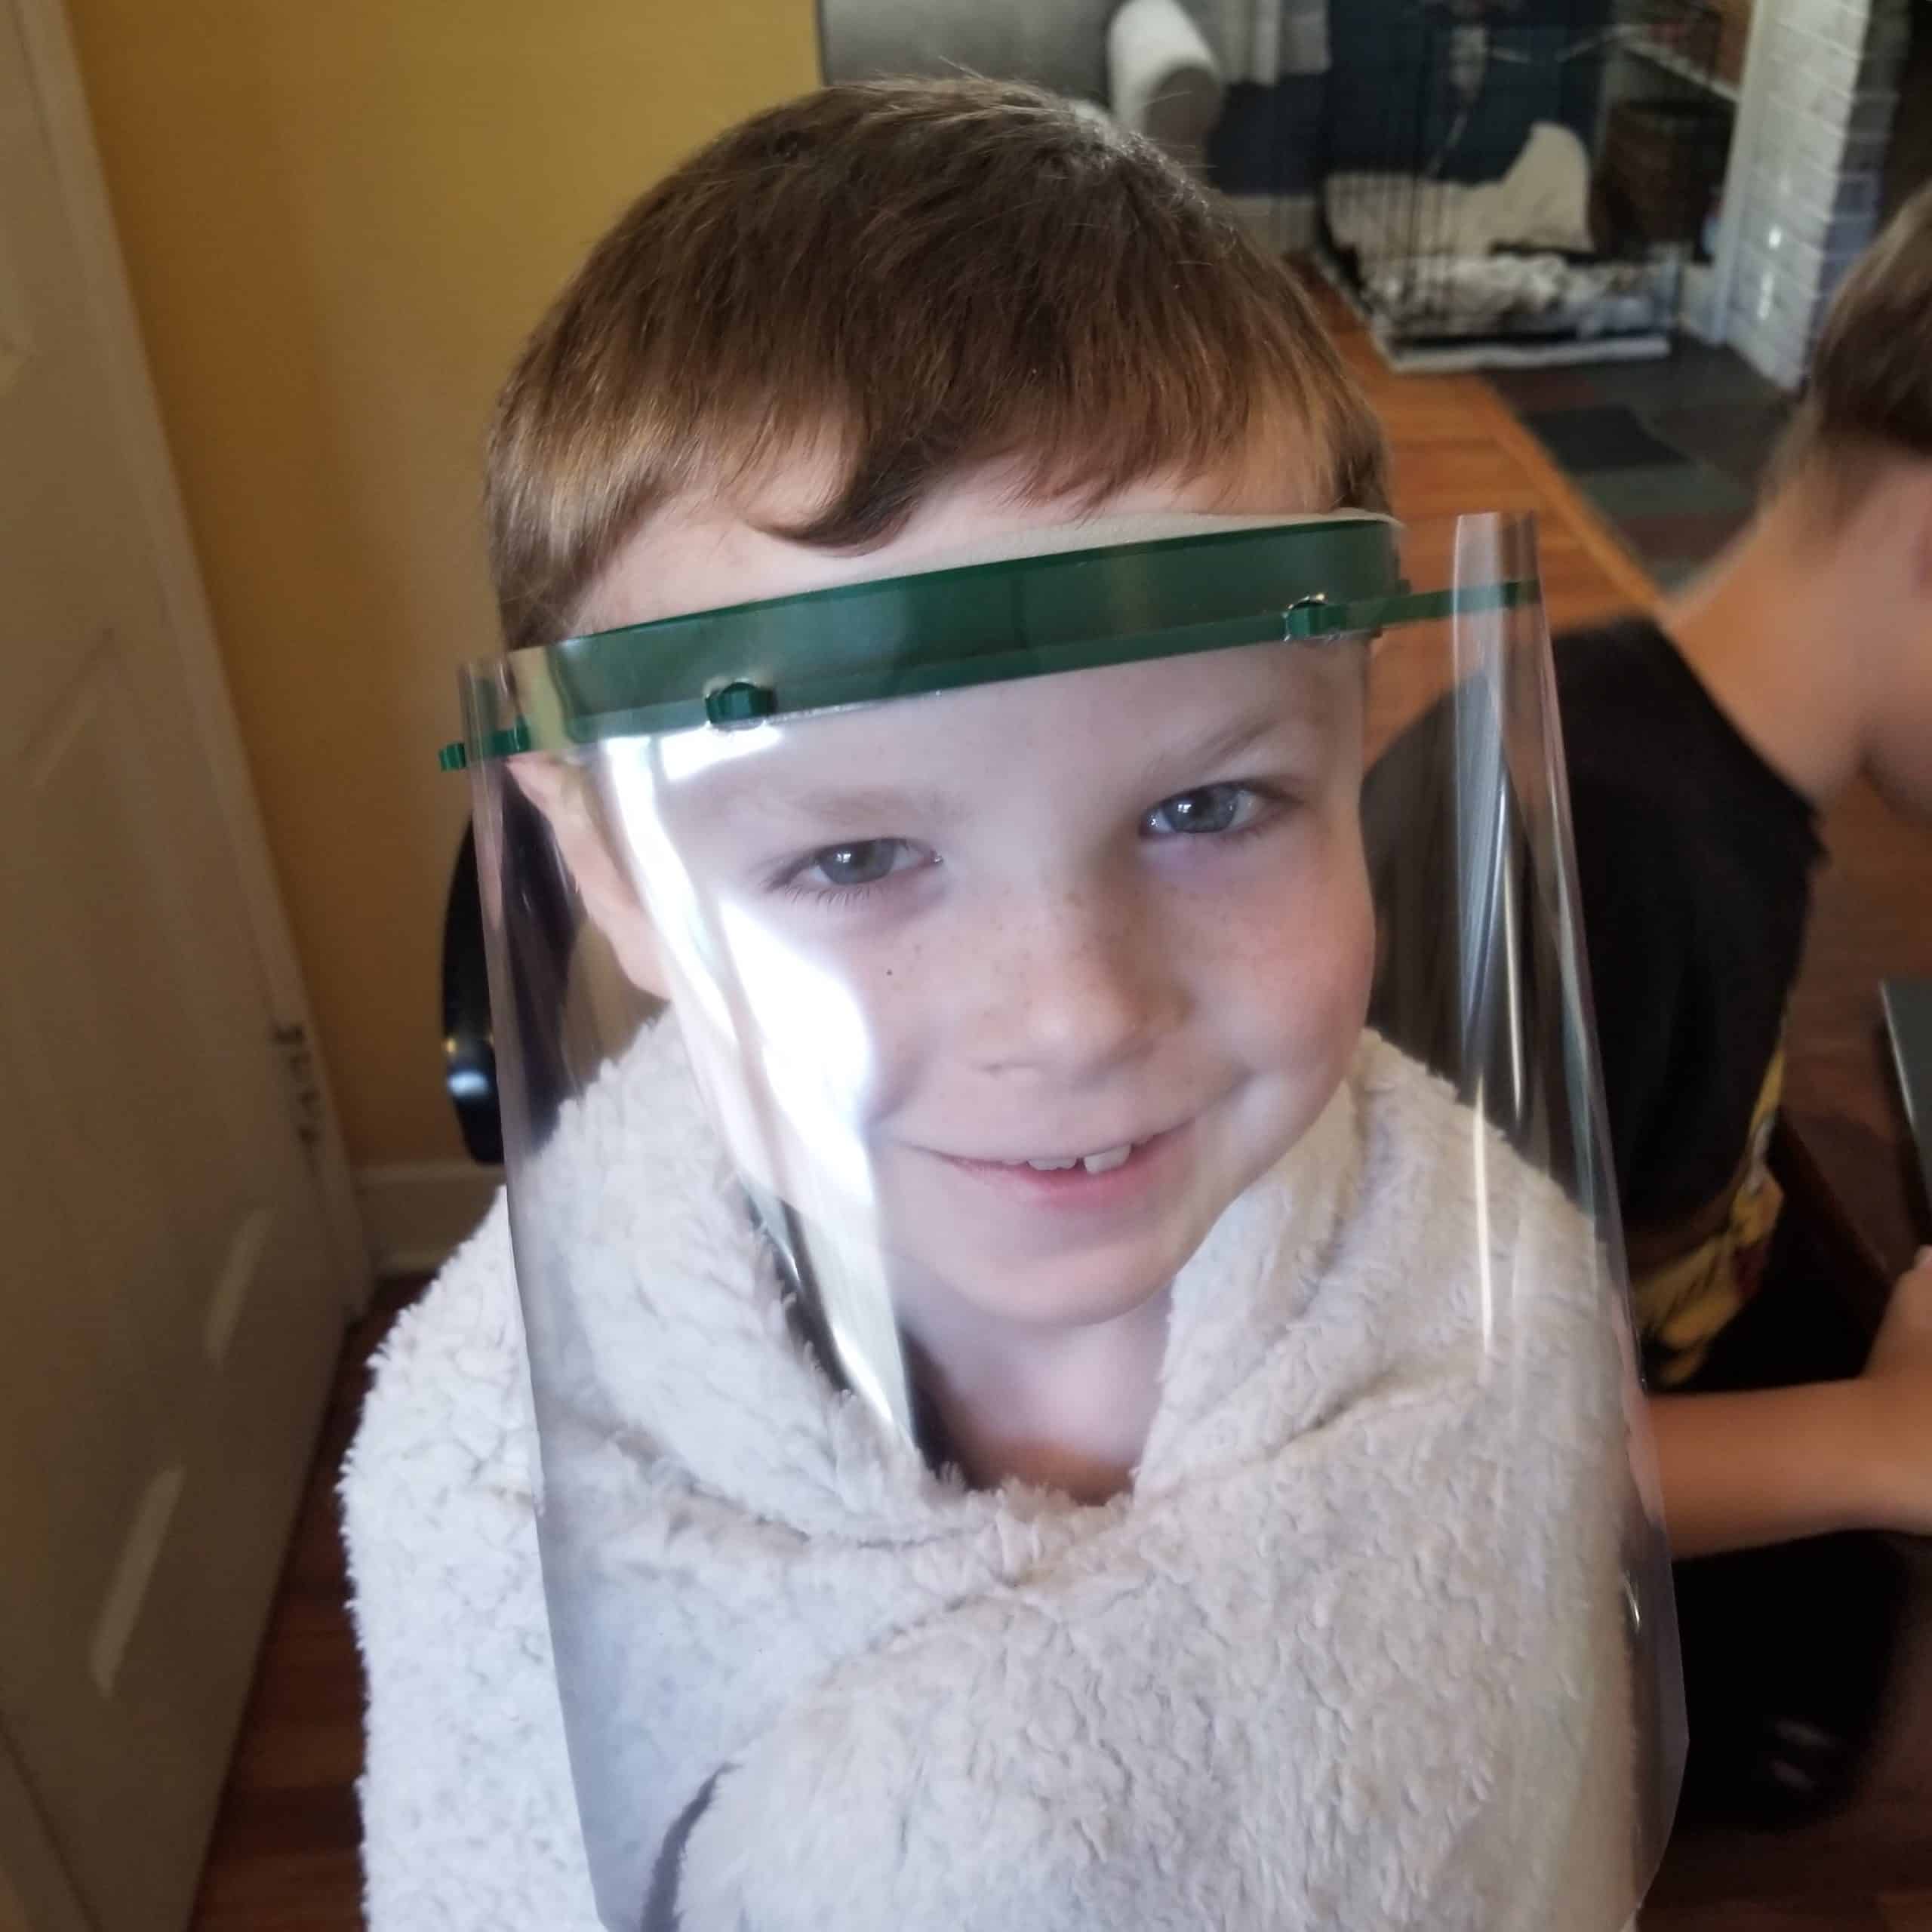 Katie's son modeling the child size face shield she created.